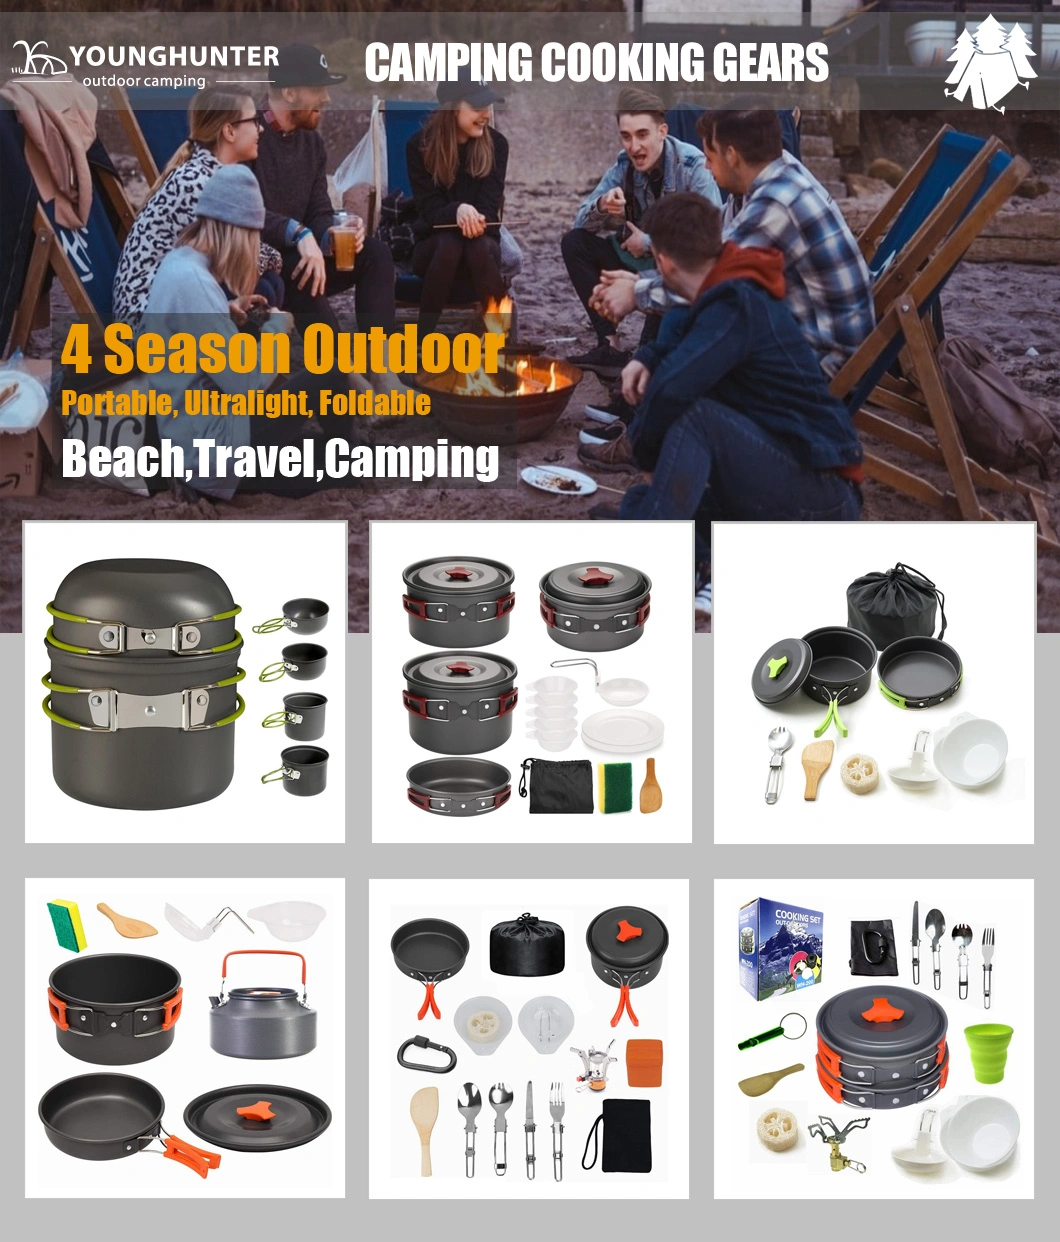 Small Pot and Frying Pan Outdoor Customized Camping Cookware Hard Alumina Portable Ultra Light Camping Cooker Set for 1-2 Person Use